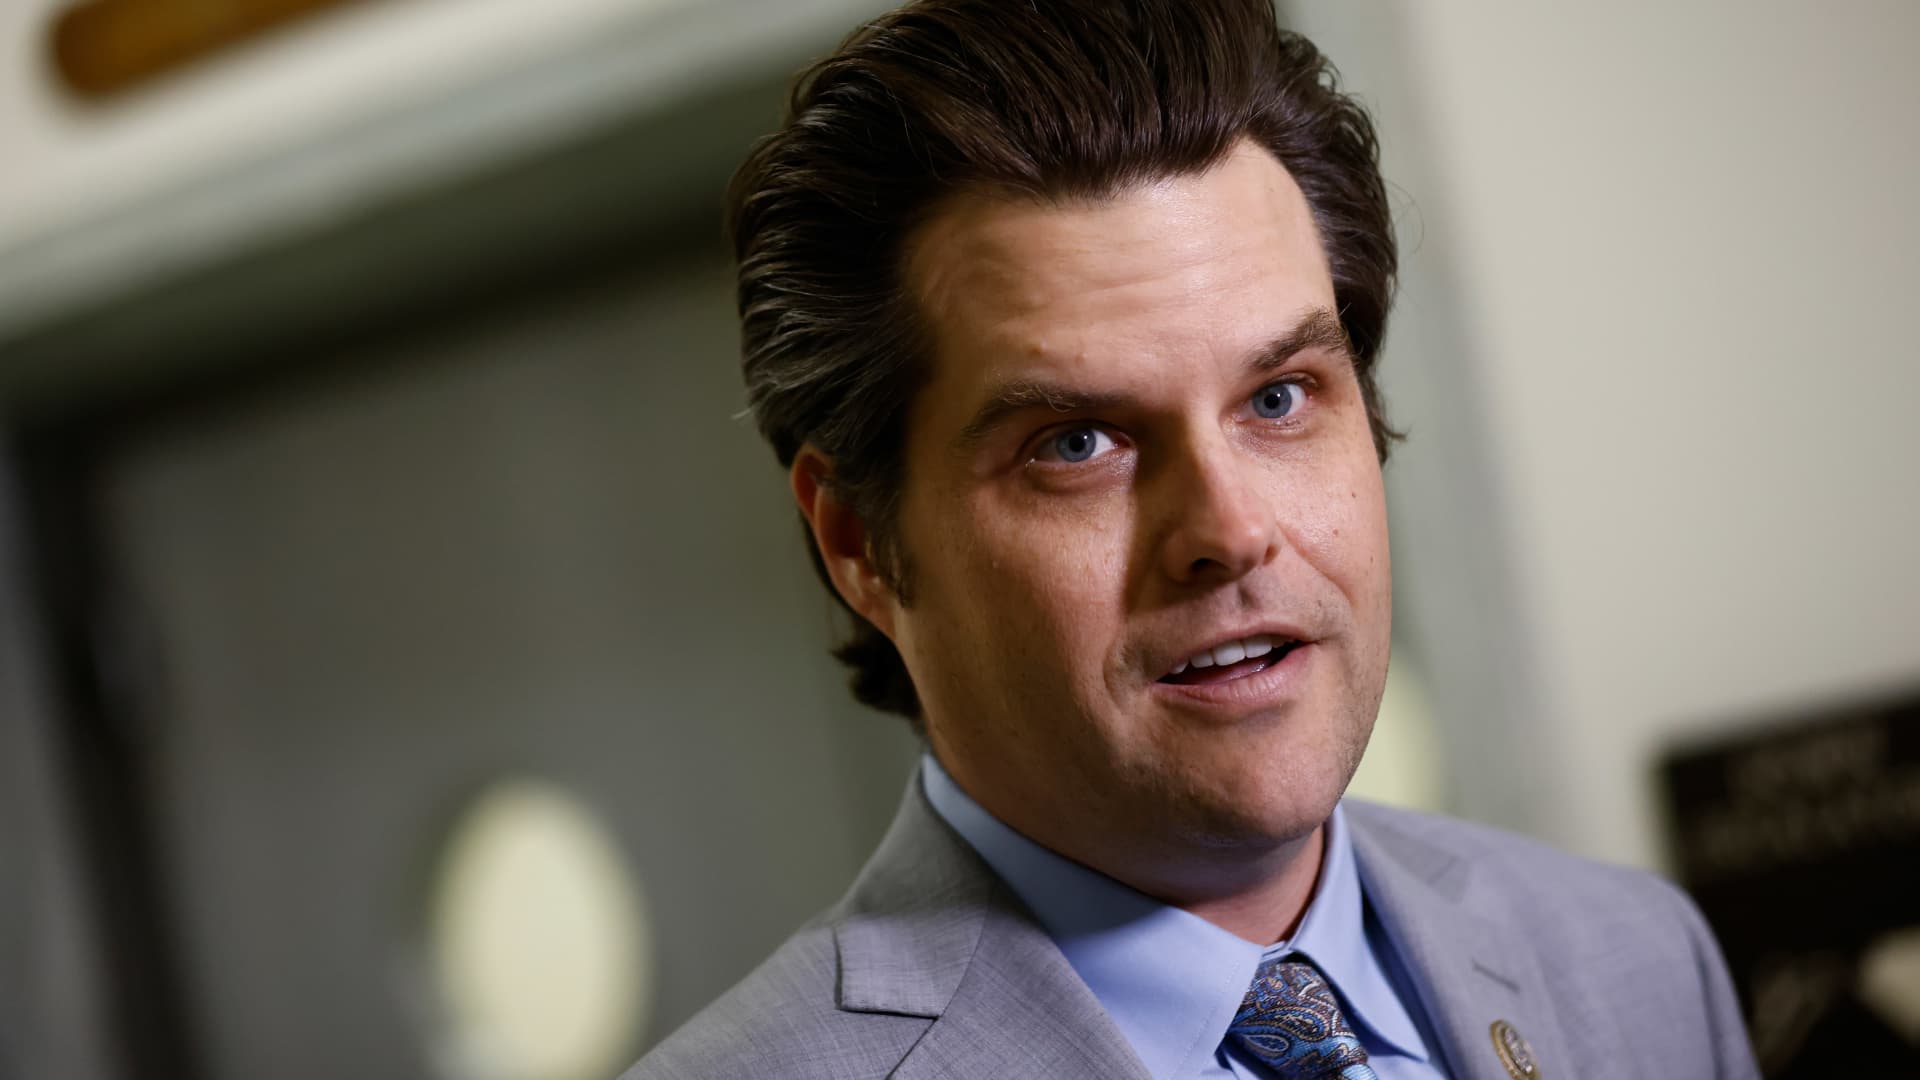 Representative Matt Gaetz, a Republican from Florida, speaks to the press in the Rayburn House Office building in Washington, D.C., on Friday, June 4, 2021.